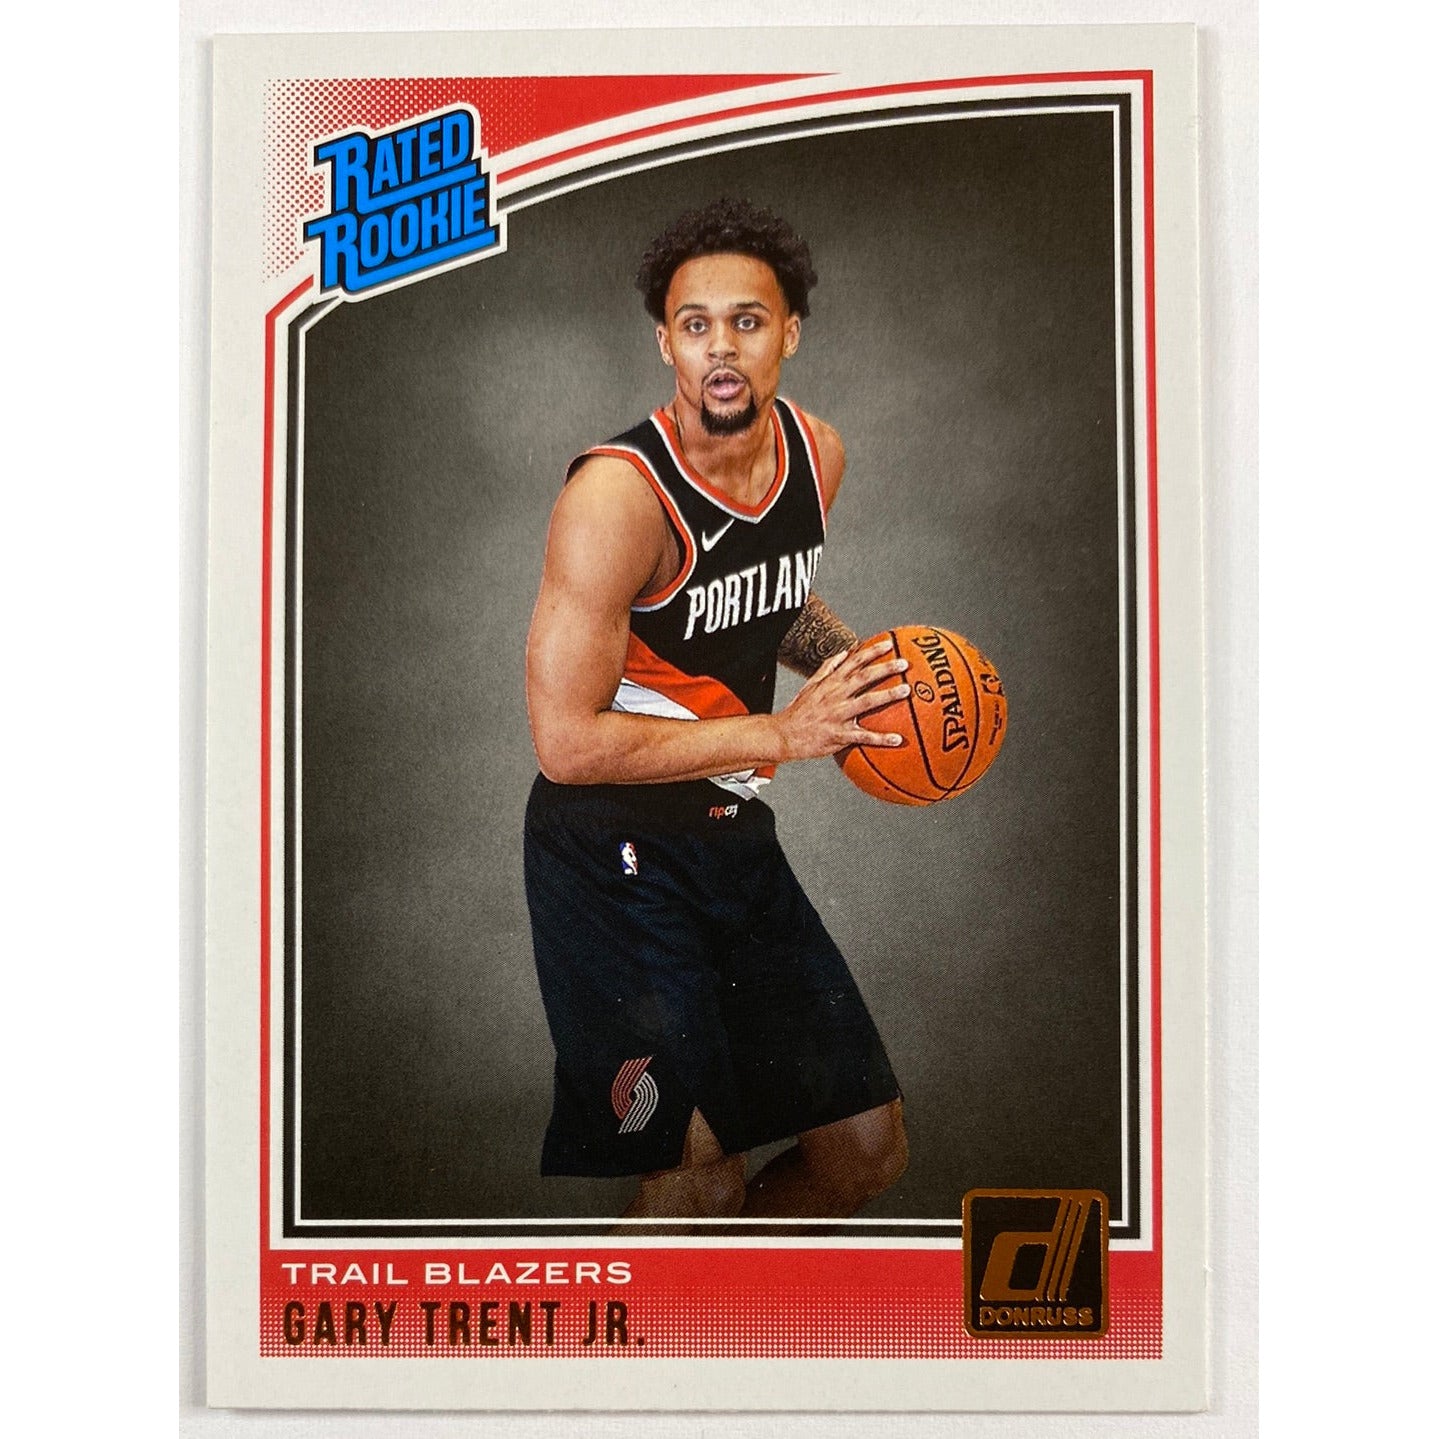 2018-19 Donruss Gary Trent Jr Rated Rookie